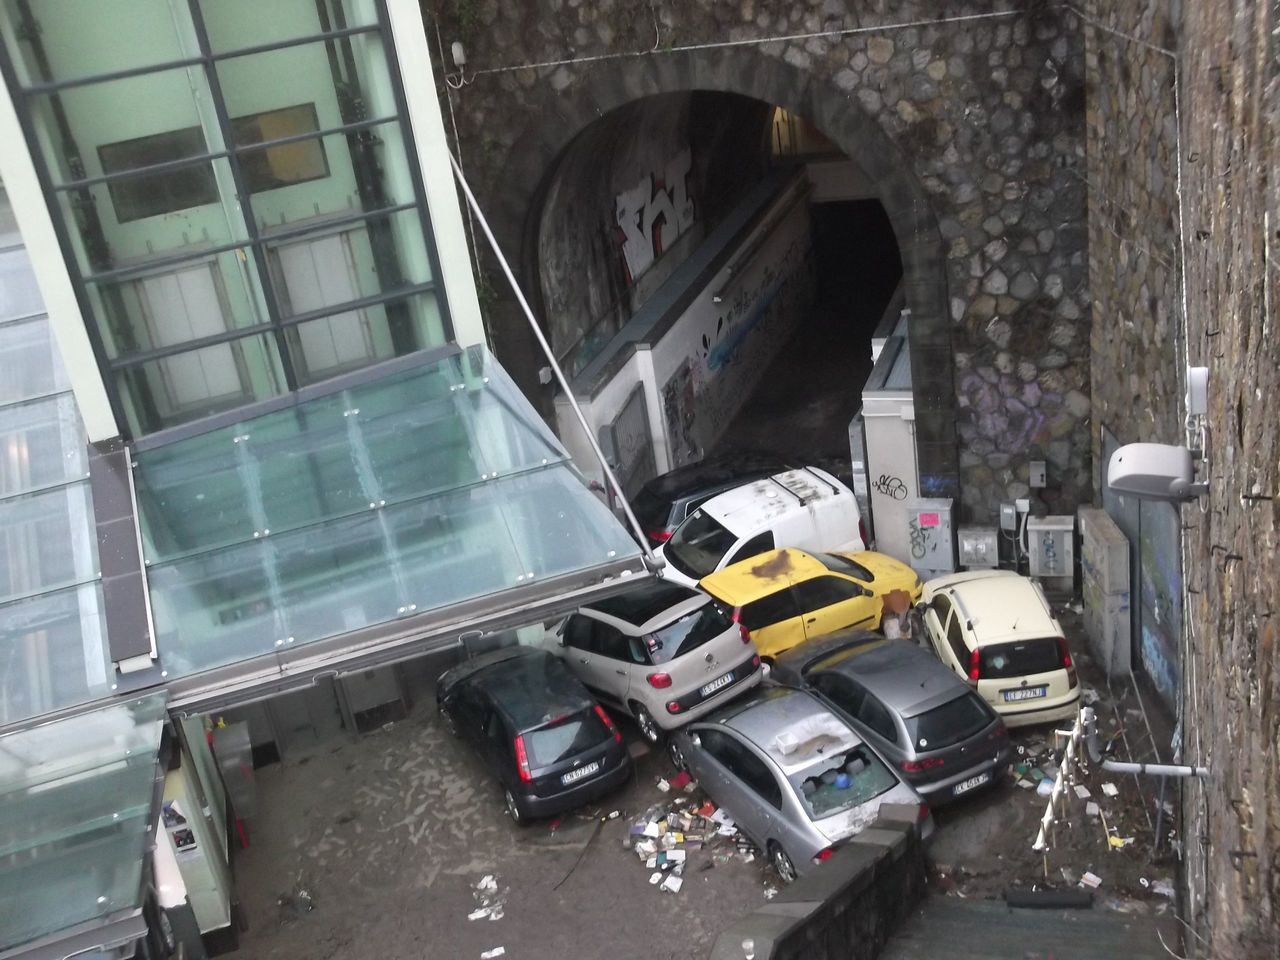 HIGH ANGLE VIEW OF CARS ON STREET AMIDST BUILDINGS